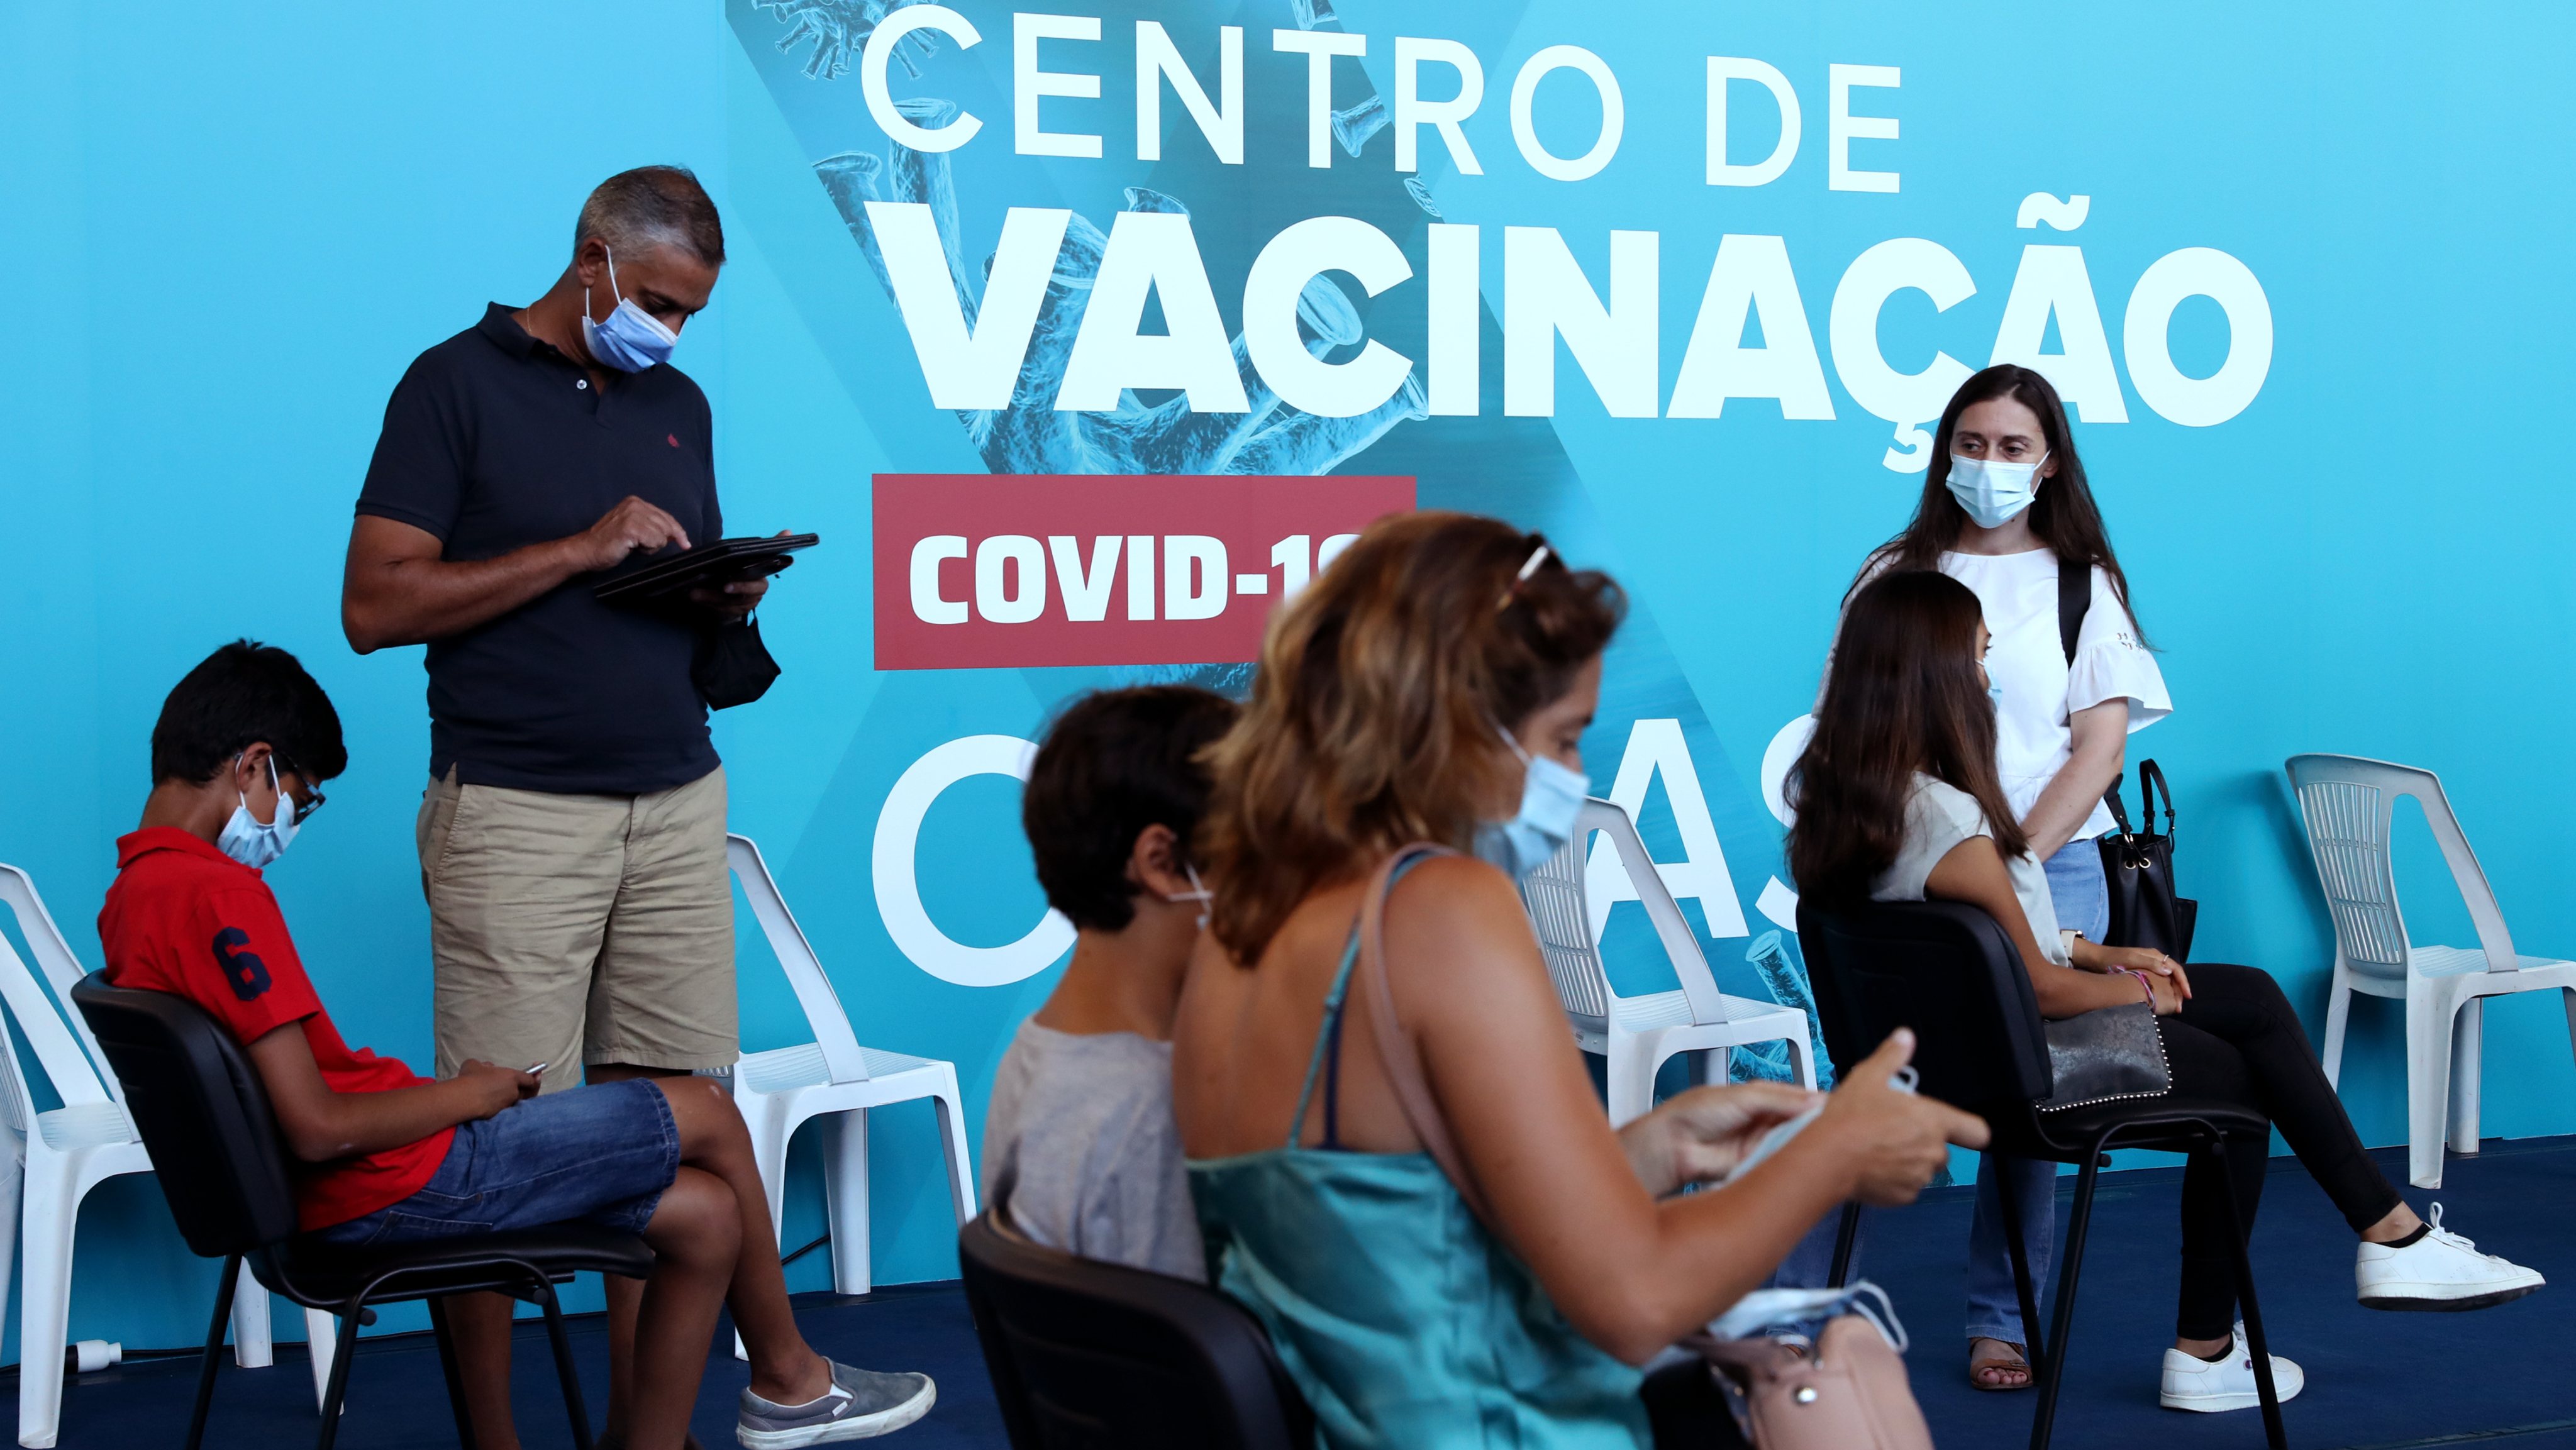 Portugal starts inoculating 12 to 15 years old against COVID-19